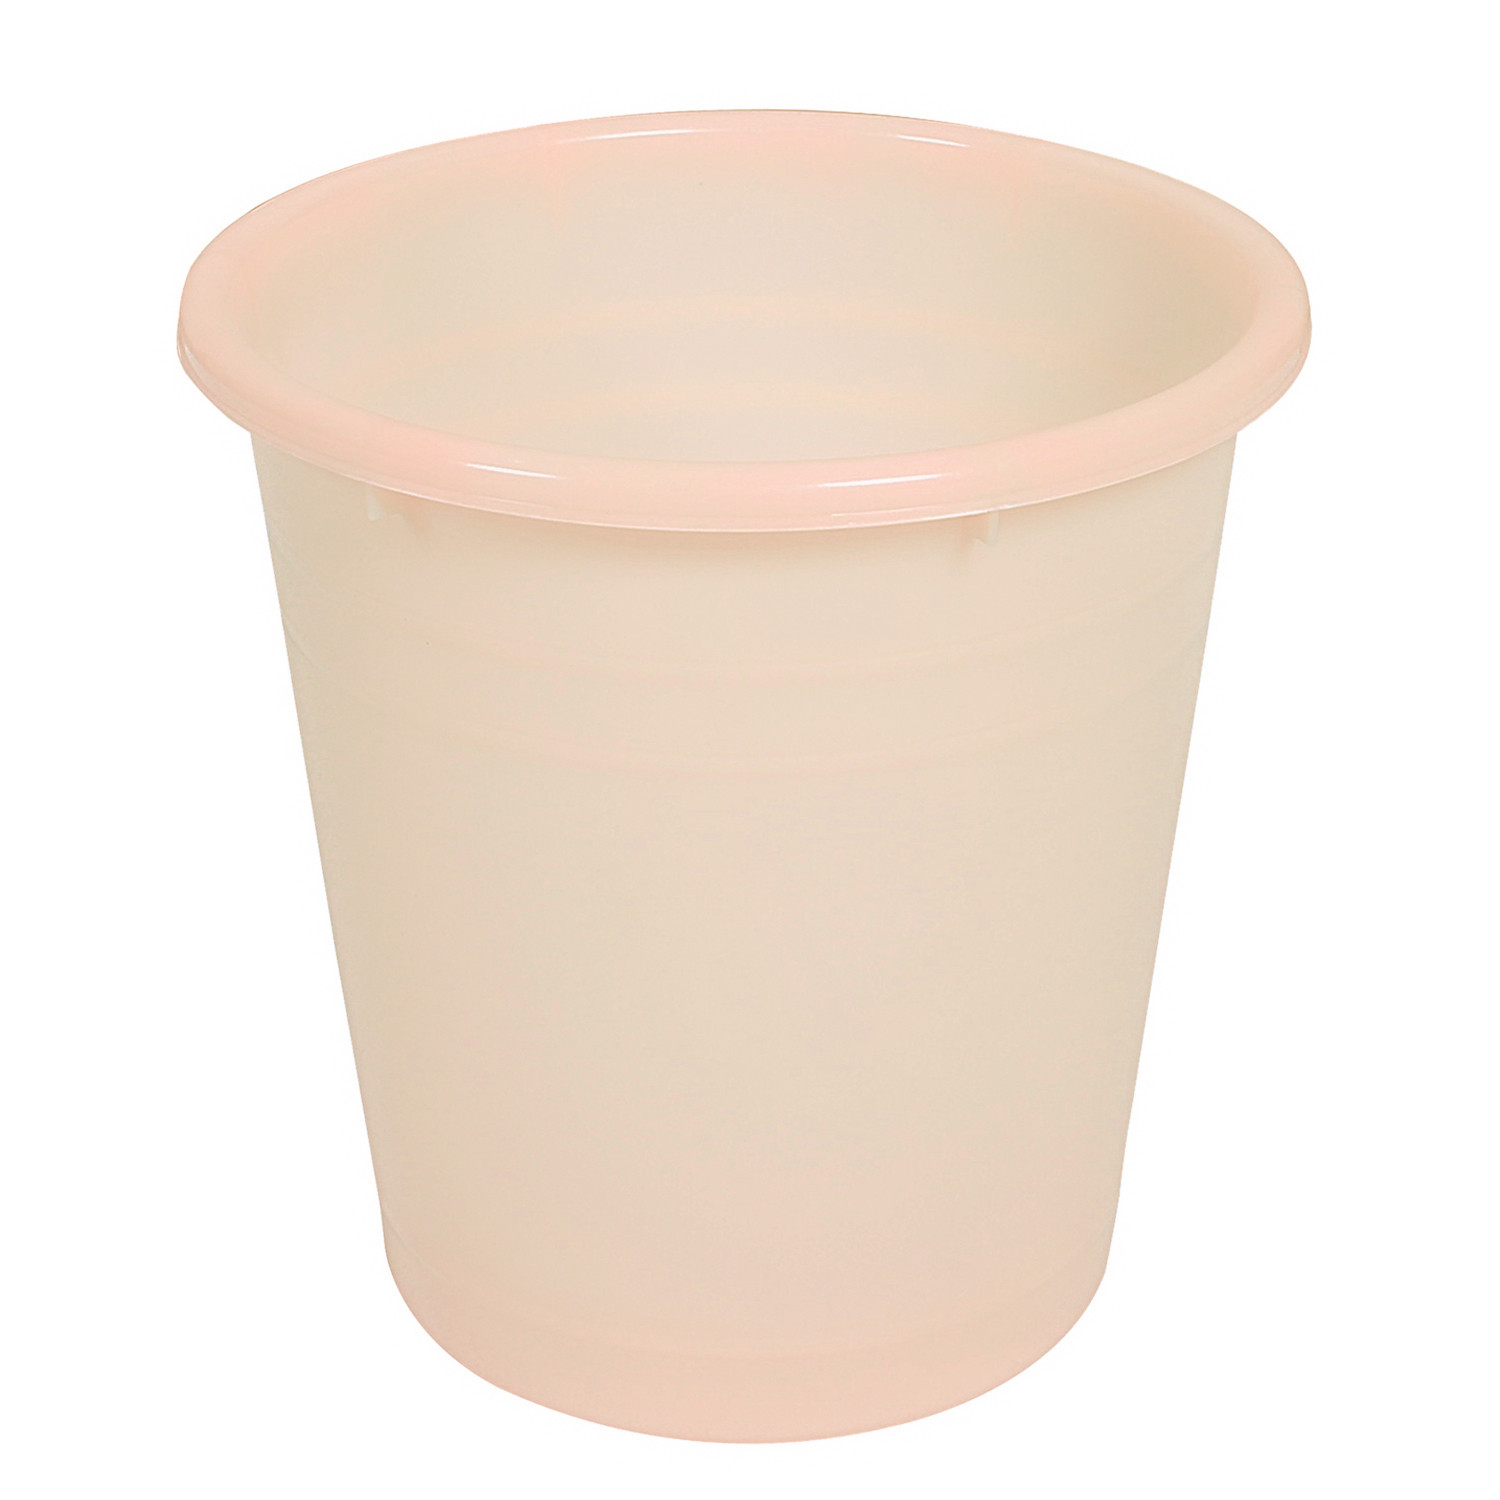 Kuber Industries Plastic Dustbin|Portable Garbage Basket & Round Trash Can for Home,Kitchen,Office,College,10 Ltr.(Cream)